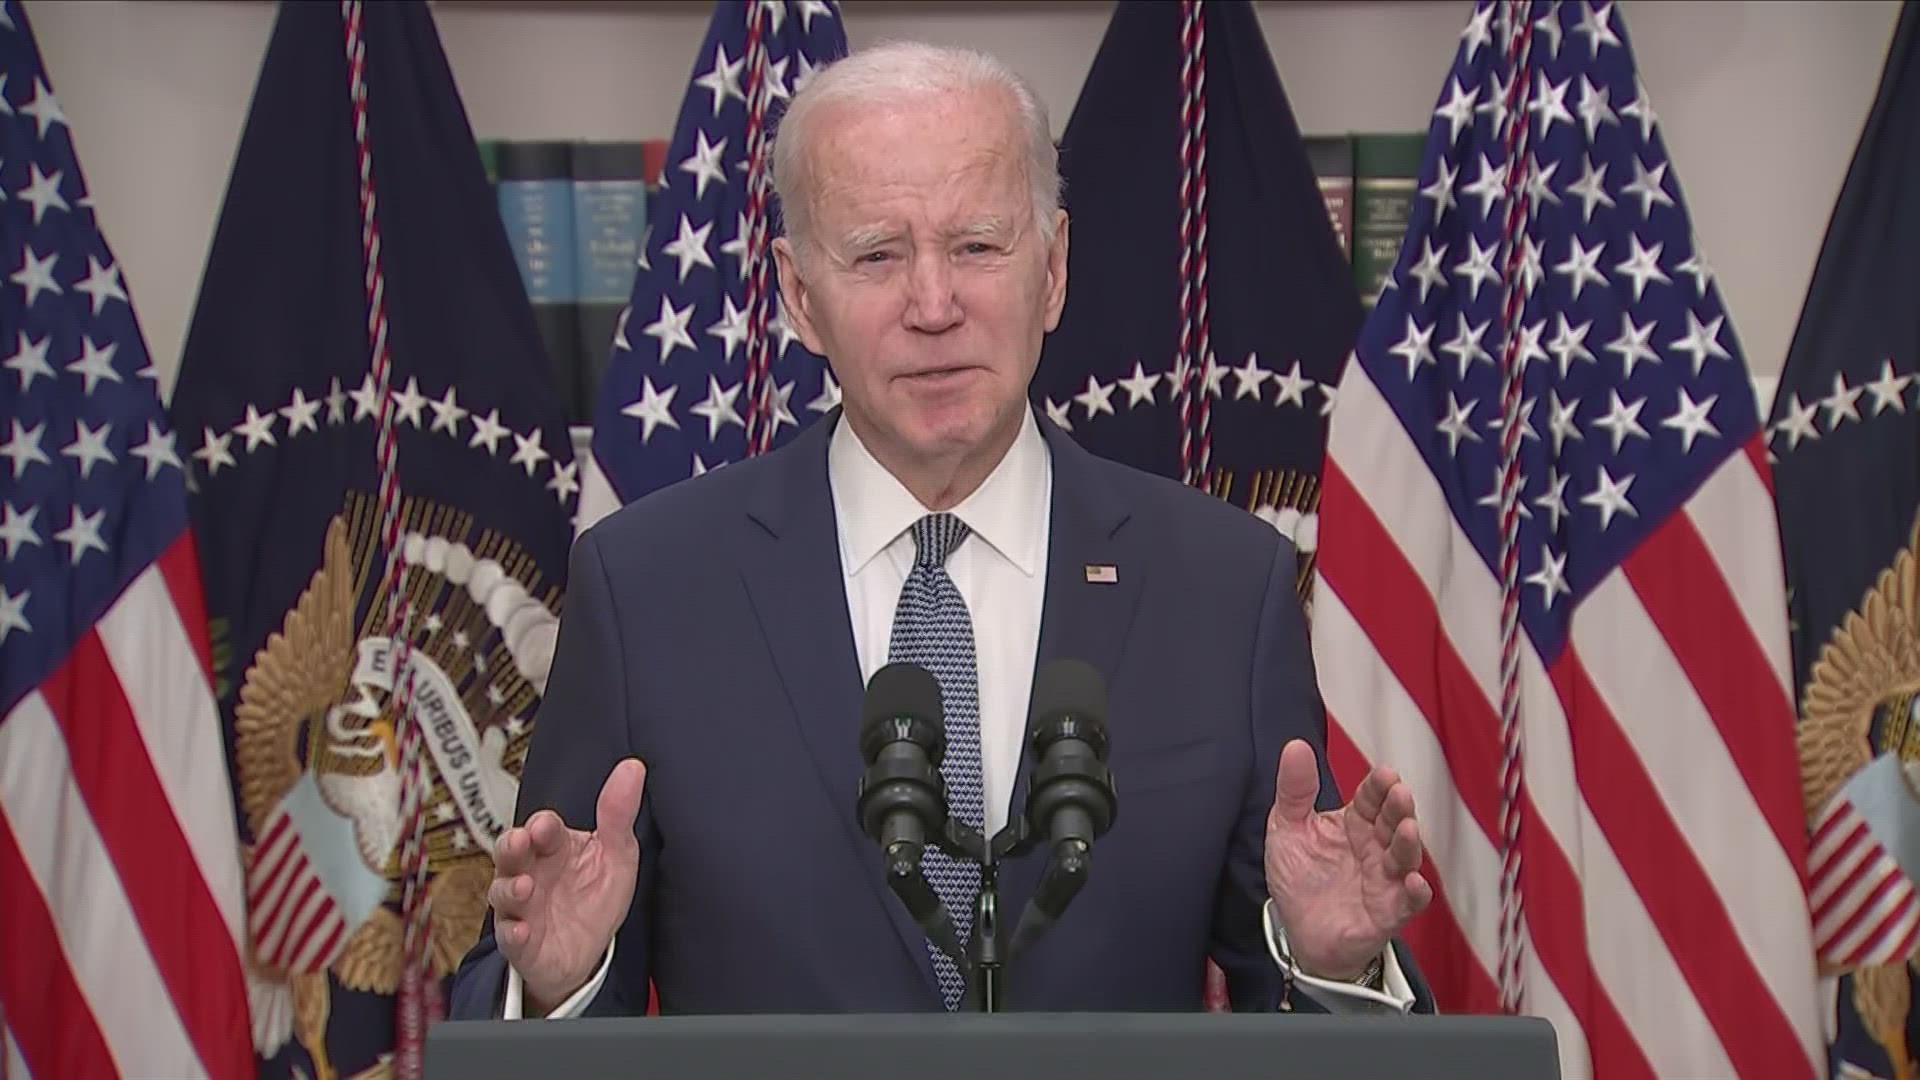 President Biden spoke Monday about the steps the U.S. is taking to stop a potential banking crisis after the historic failure of Silicon Valley Bank.